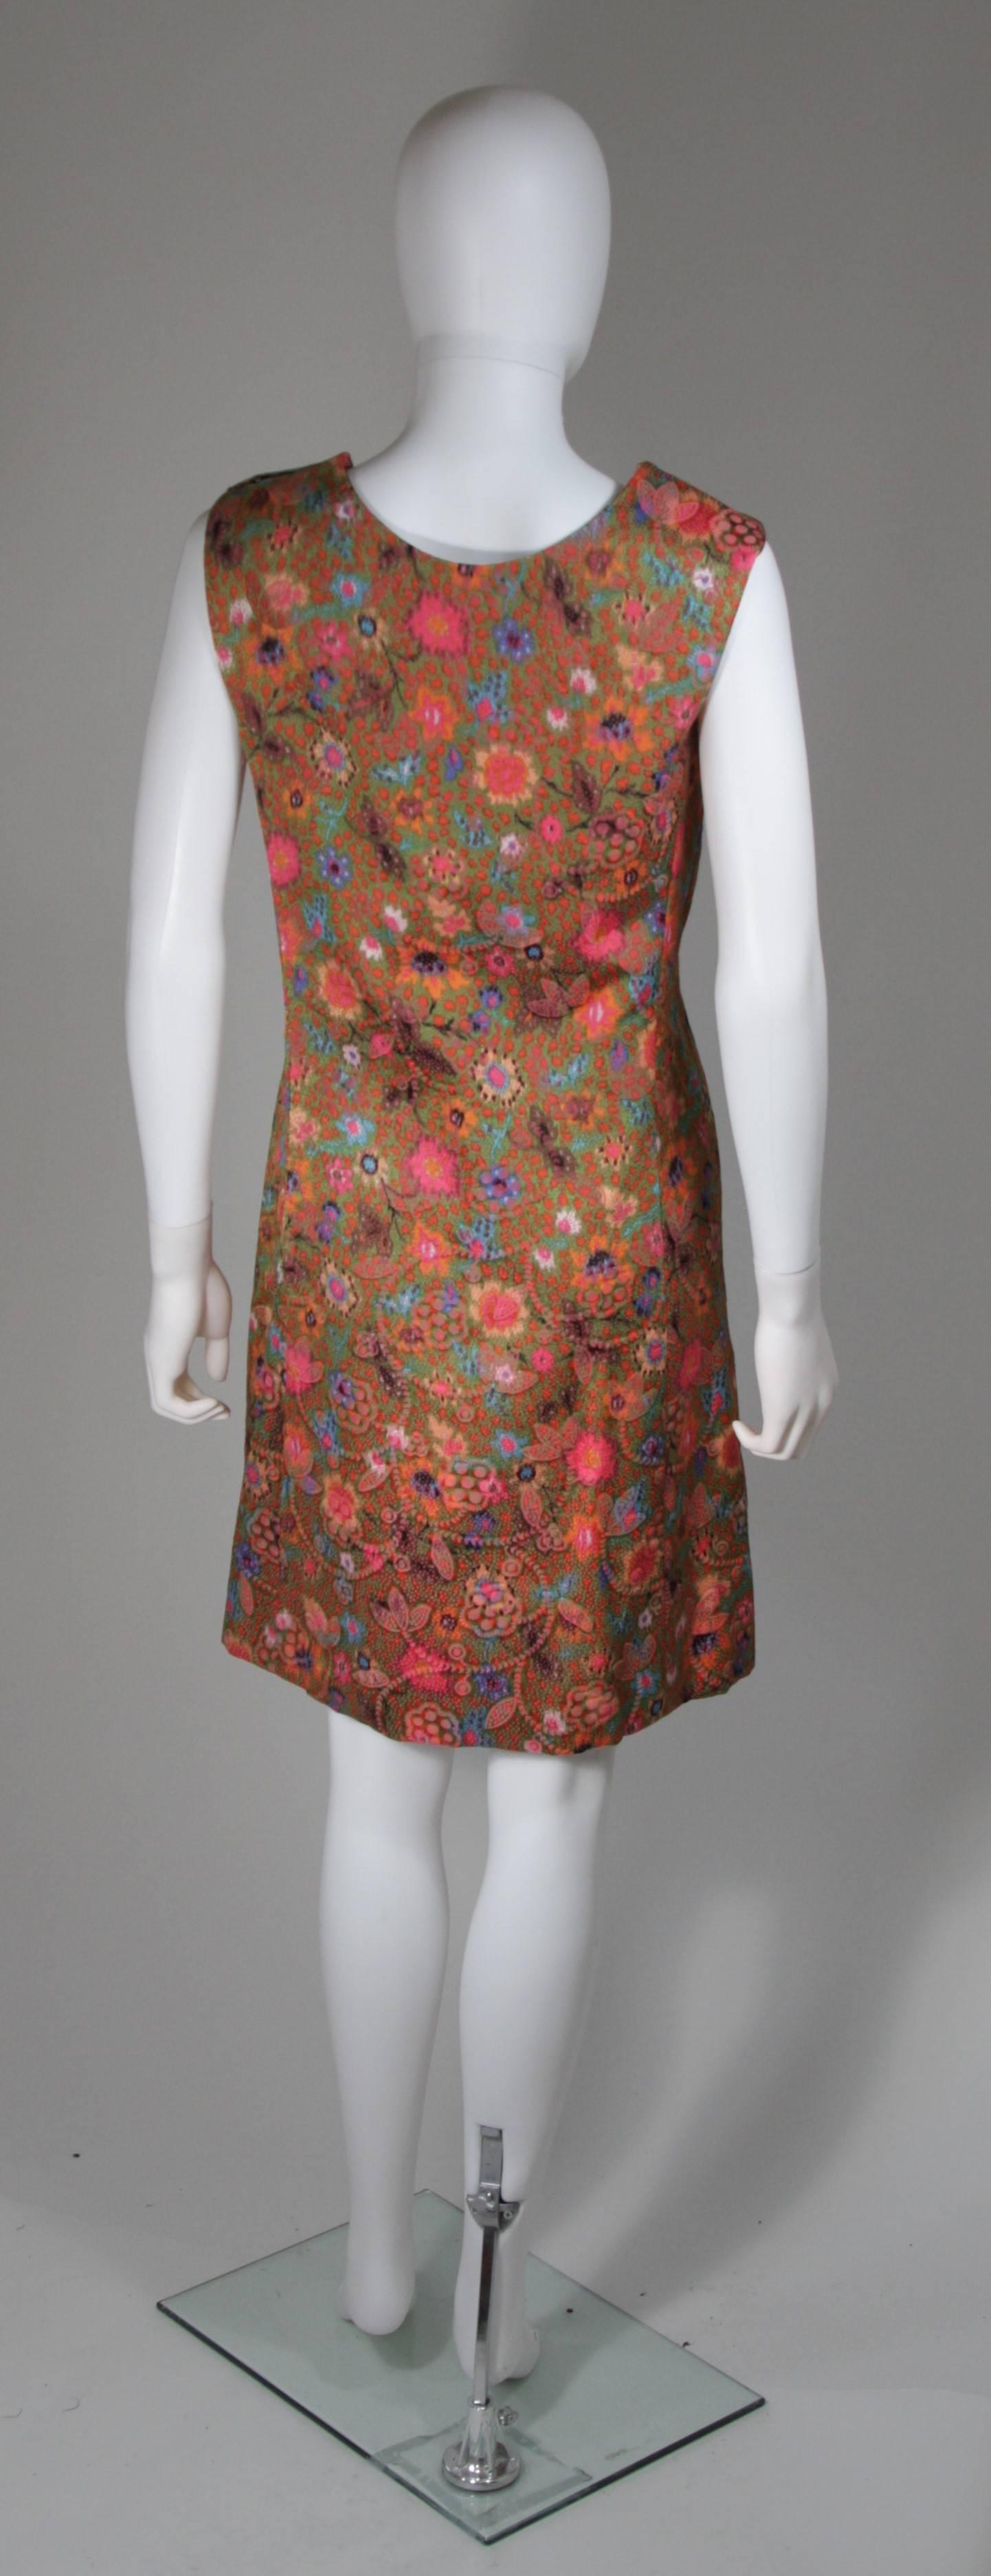 Galanos Floral Print Shift Dress with Pockets Size Small Medium For Sale 4